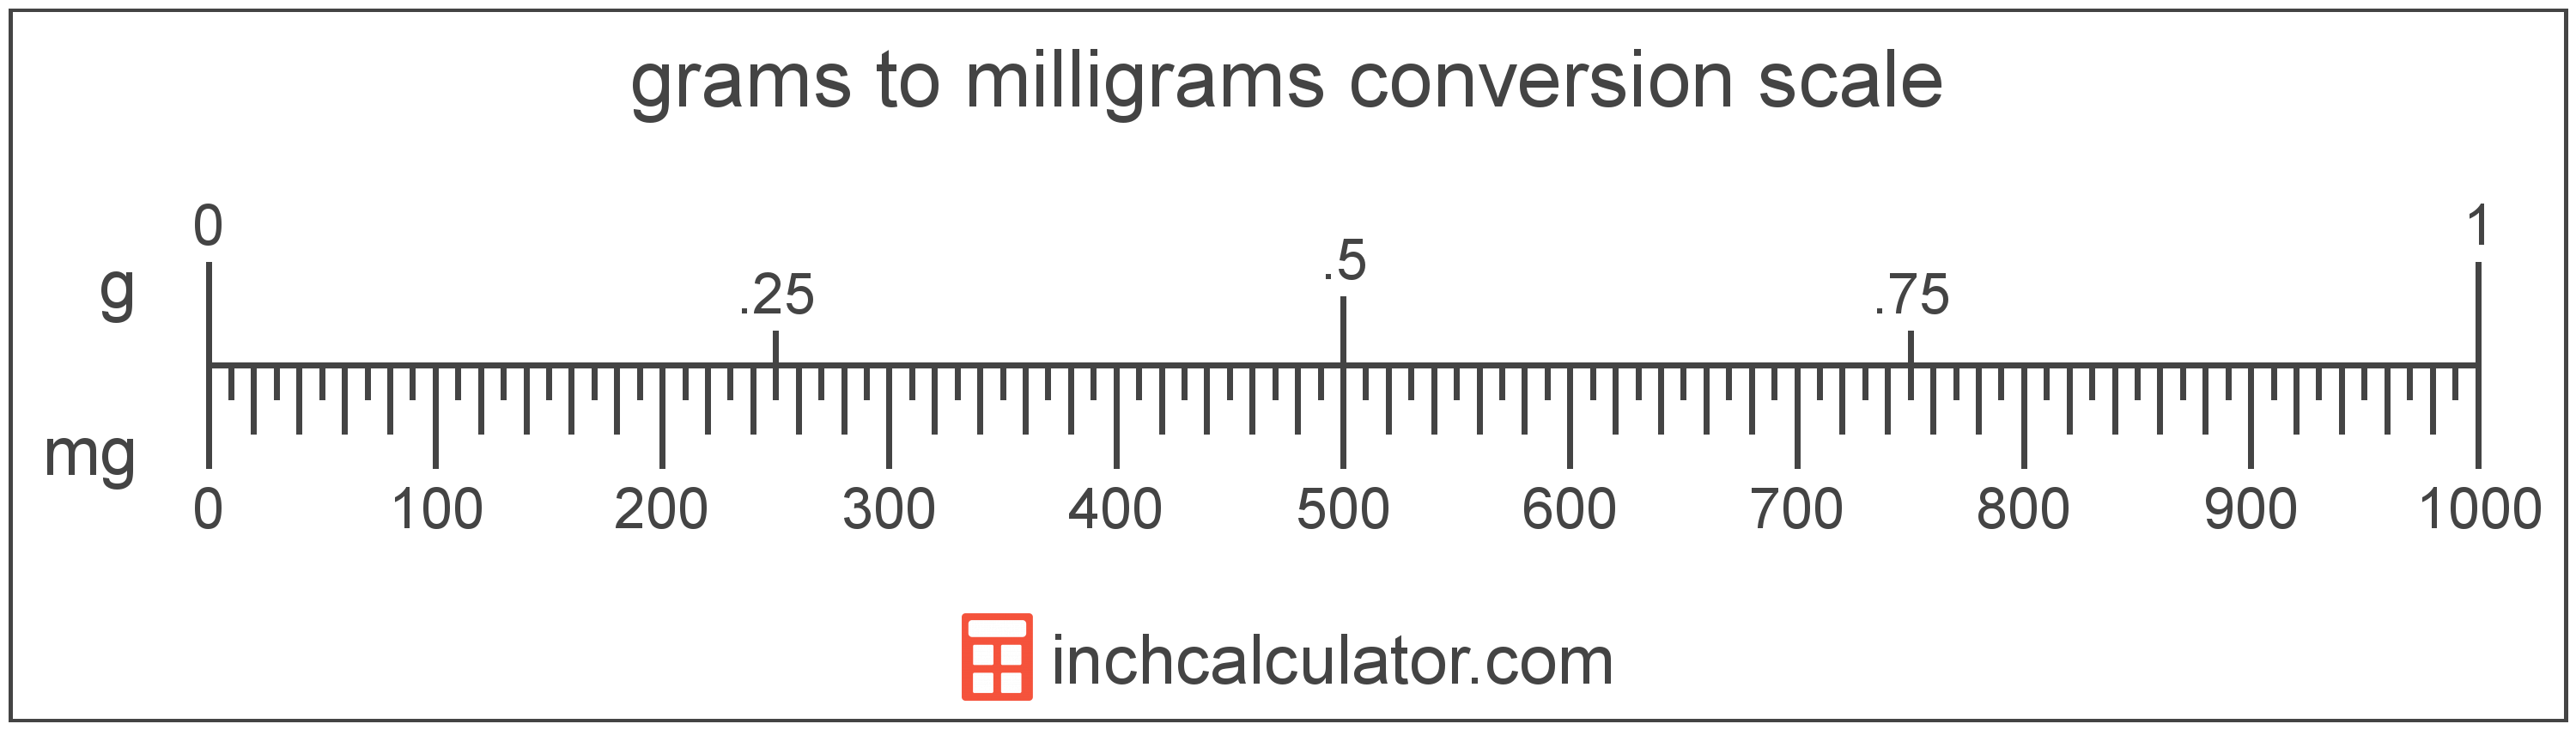 conversion scale showing milligrams and equivalent grams weight values